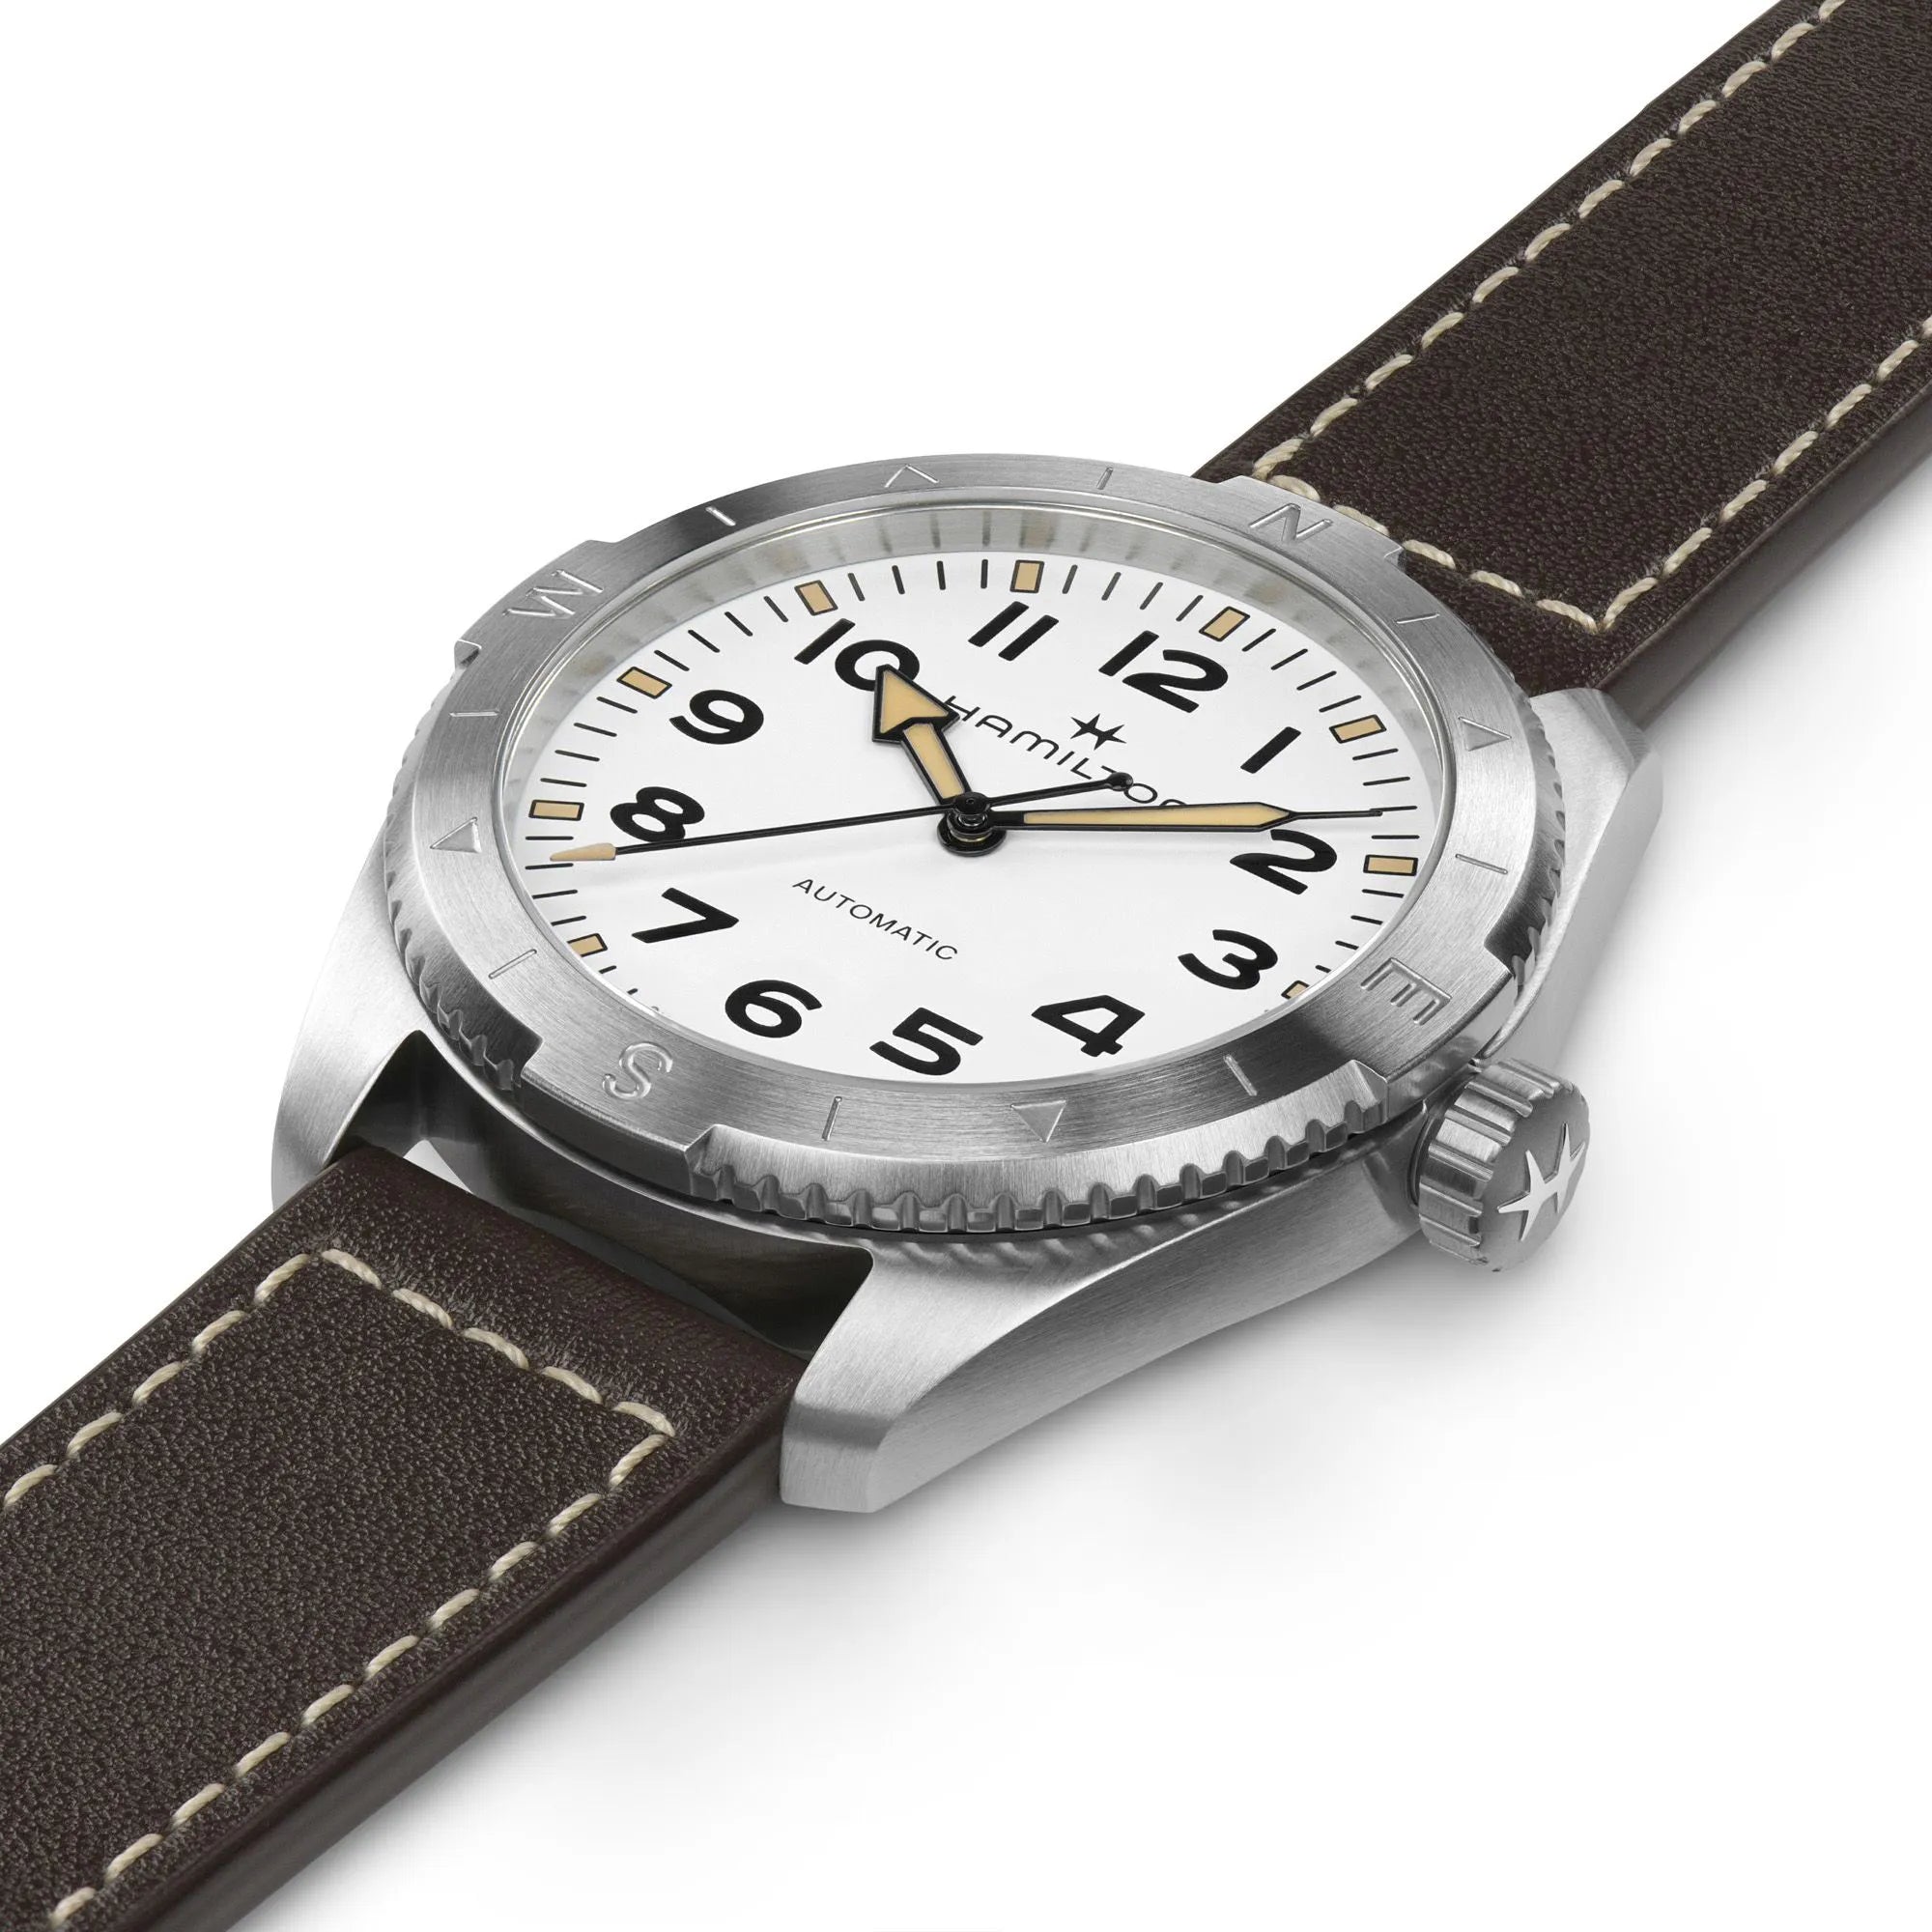 Khaki Field Expedition Auto - 41mm - H70315510